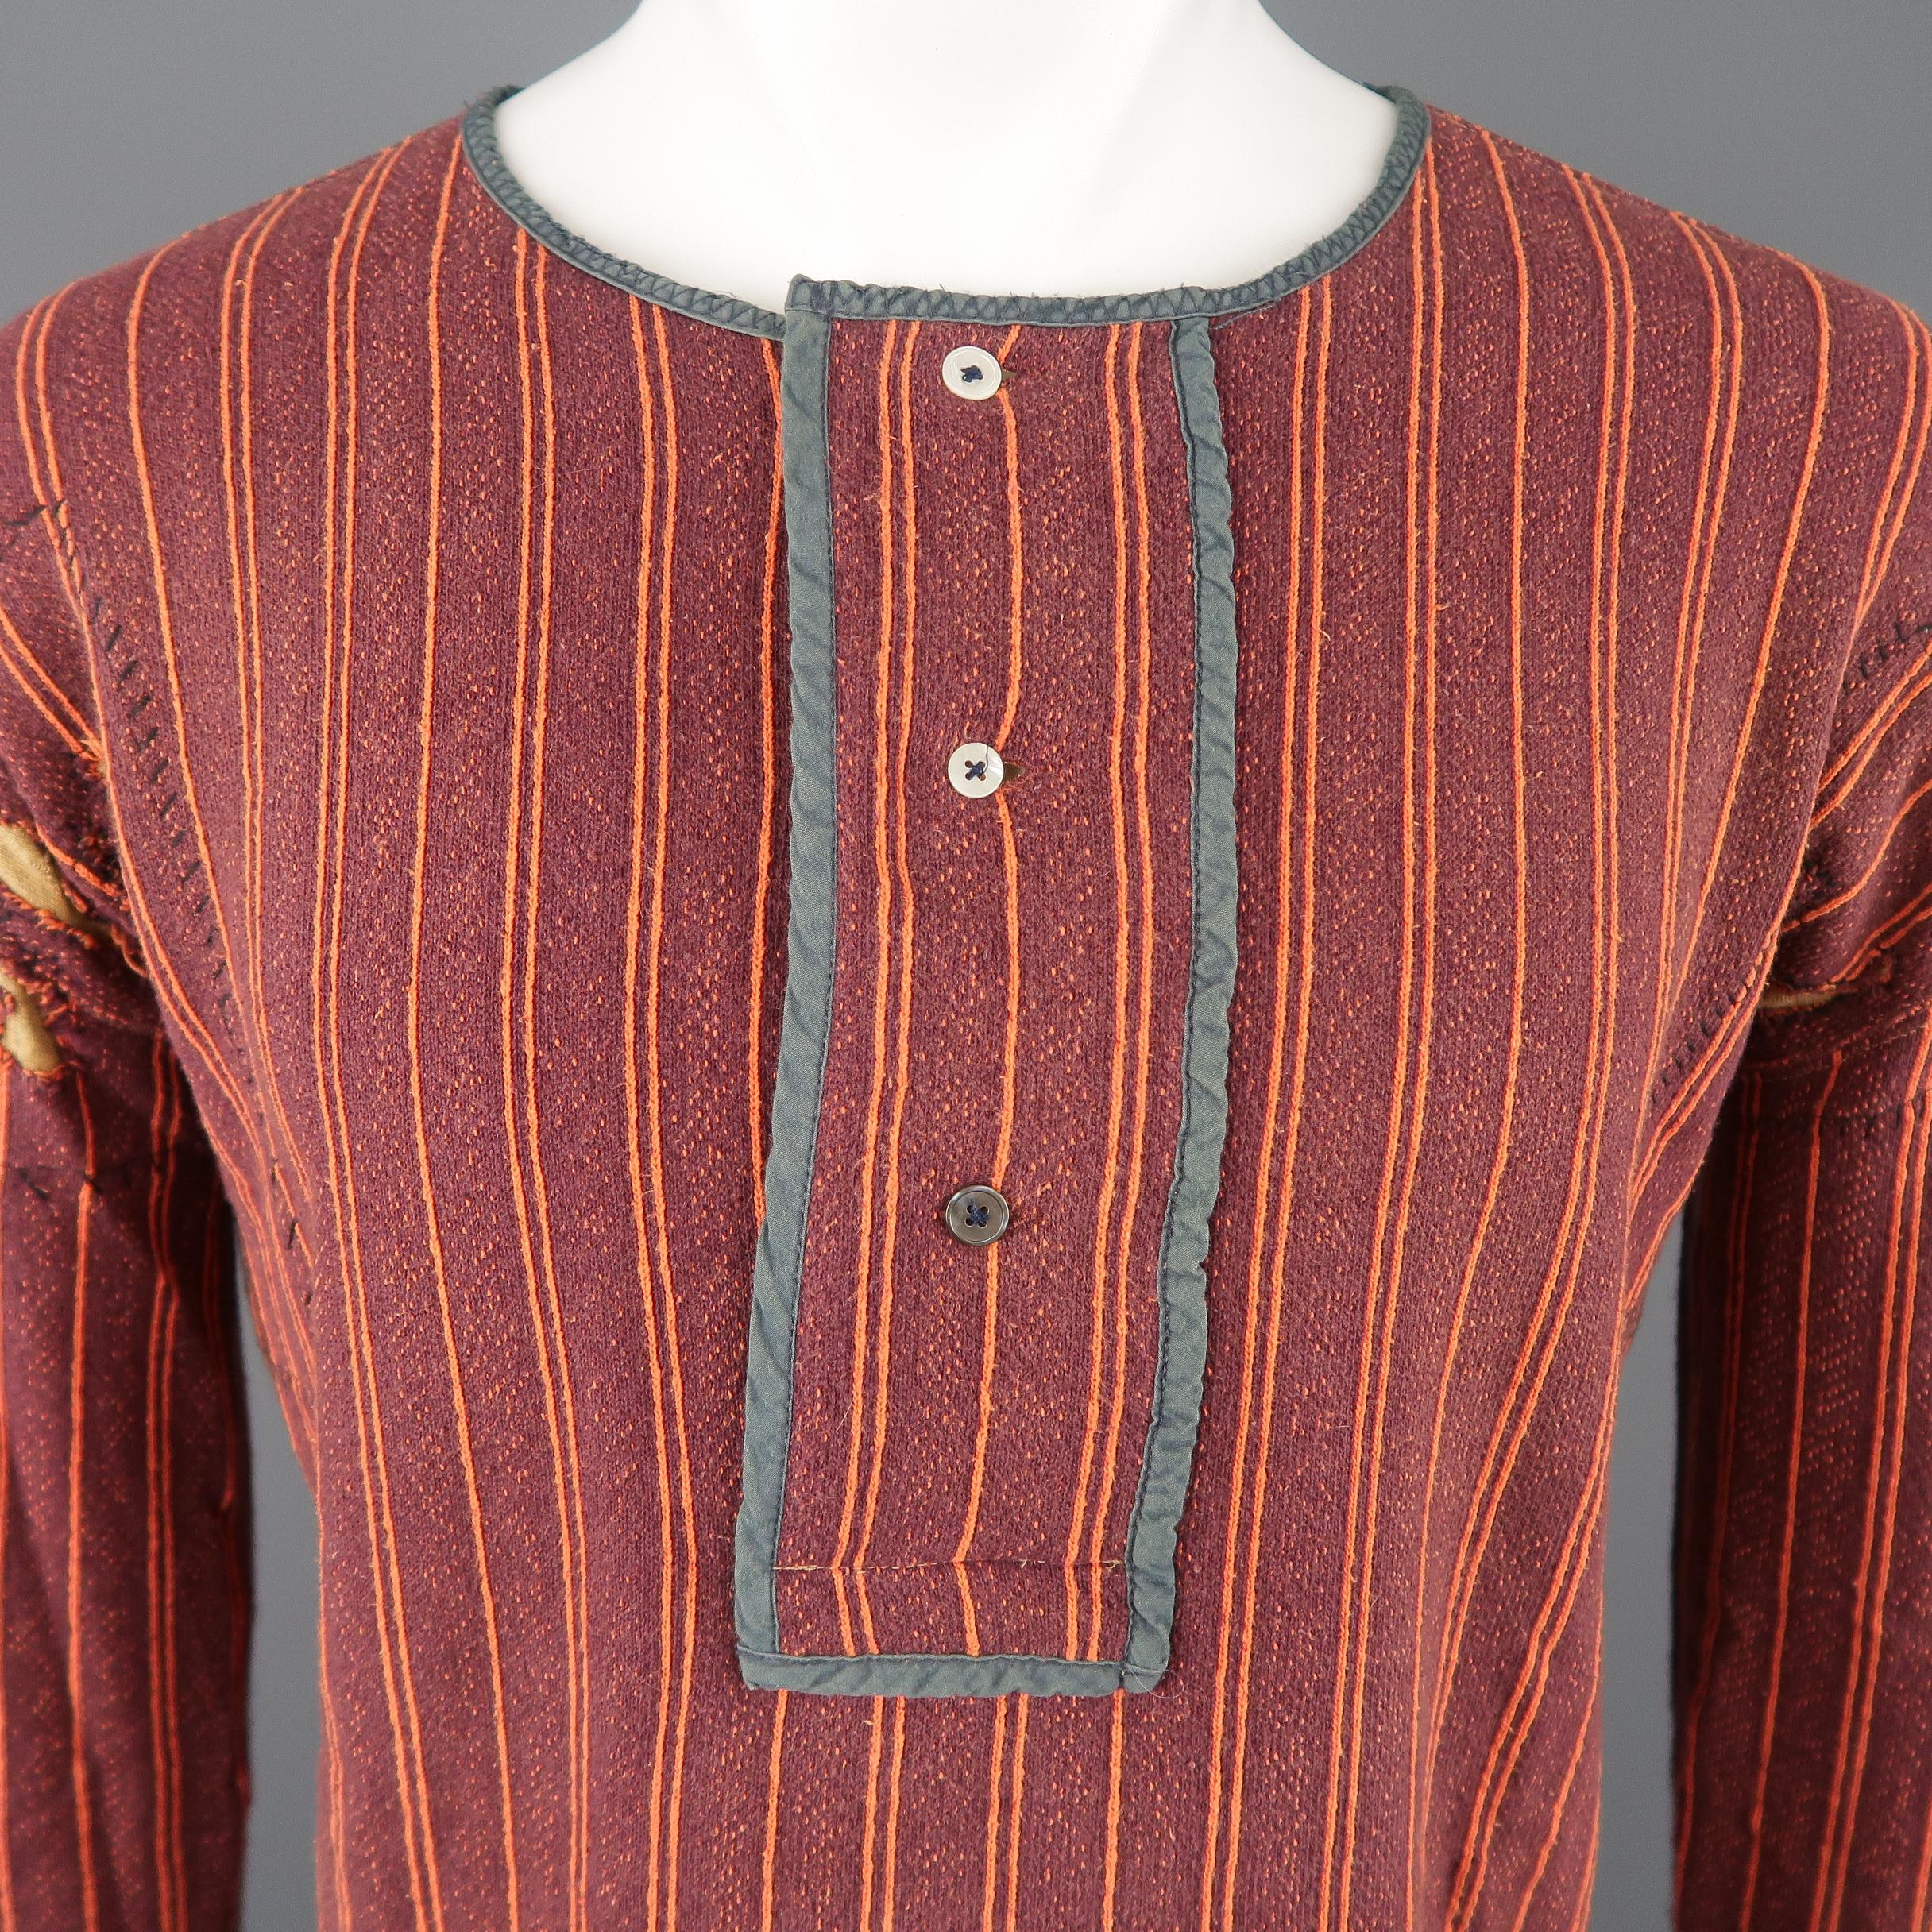 SUNSET pullover comes in burgundy and orange striped jersey knit with a round collar, teal trimmed Henley half button closure, and distressed details with gold inner patch hand stitch embellishments. Made in Portugal.
 
Excellent Pre-Owned